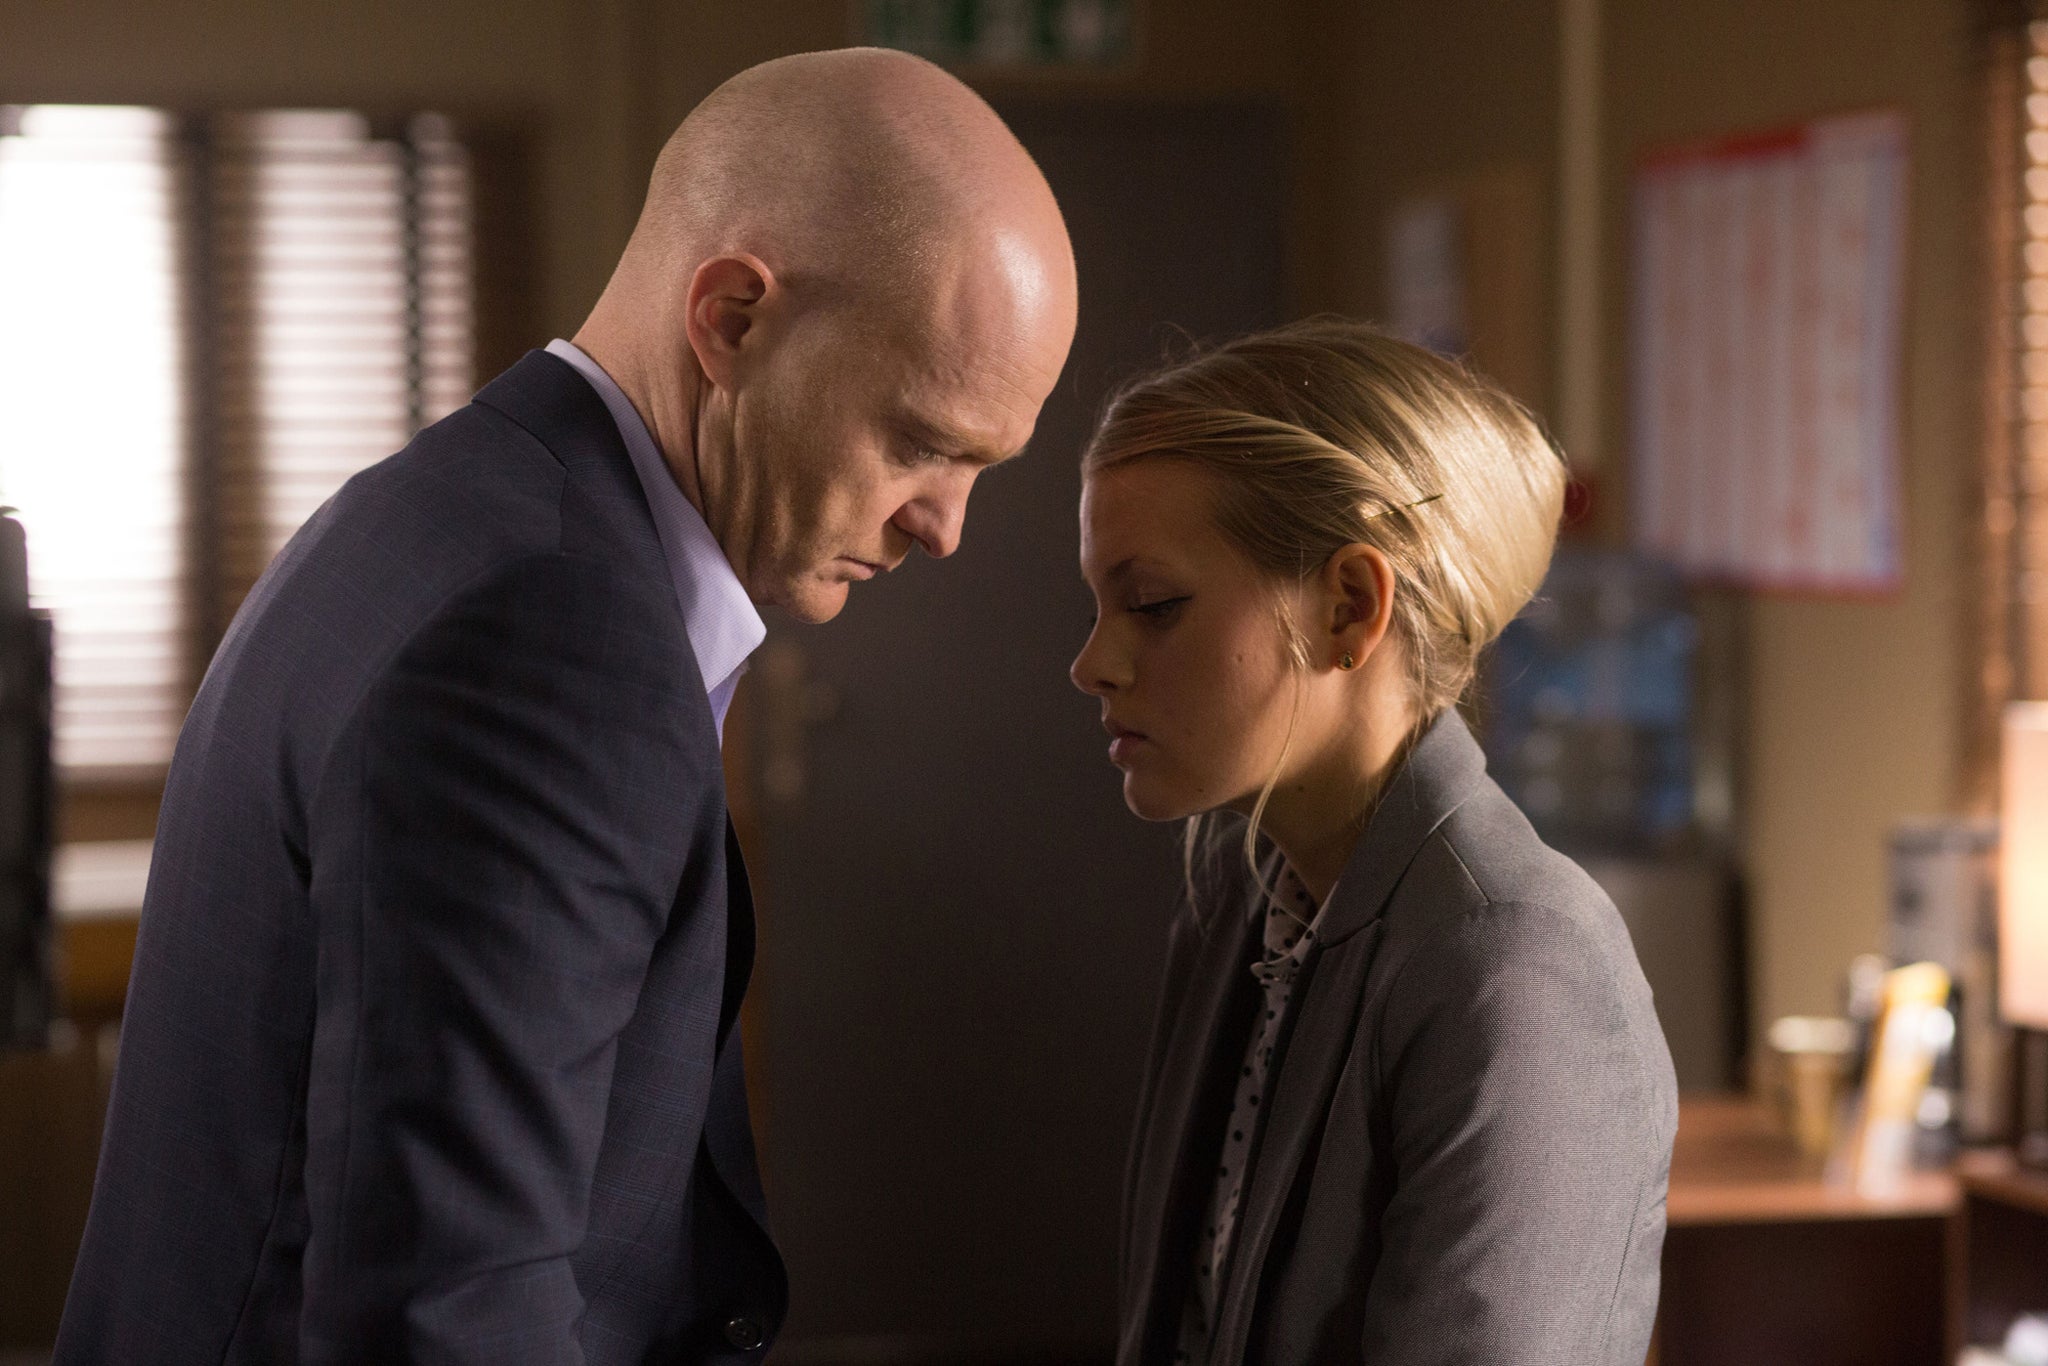 Max Branning gives Lucy Beale some advice